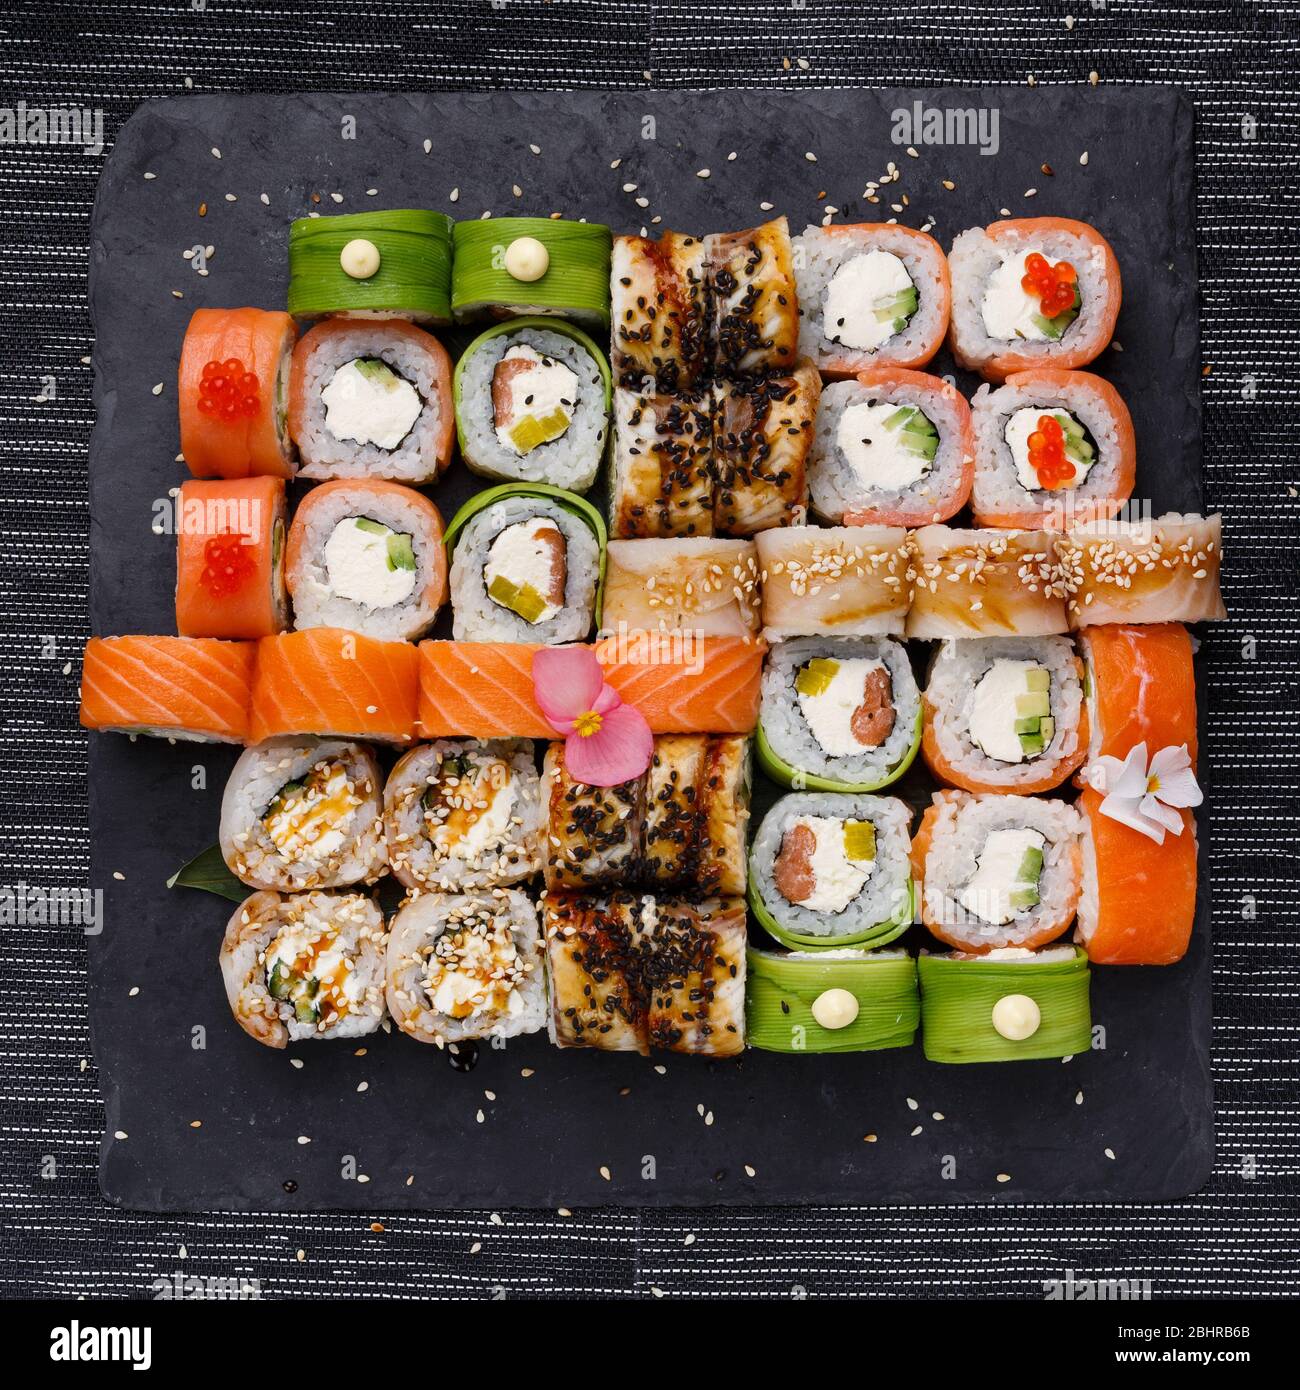 https://c8.alamy.com/comp/2BHRB6B/japanese-sushi-set-various-types-of-roles-on-plate-over-stone-background-top-view-2BHRB6B.jpg